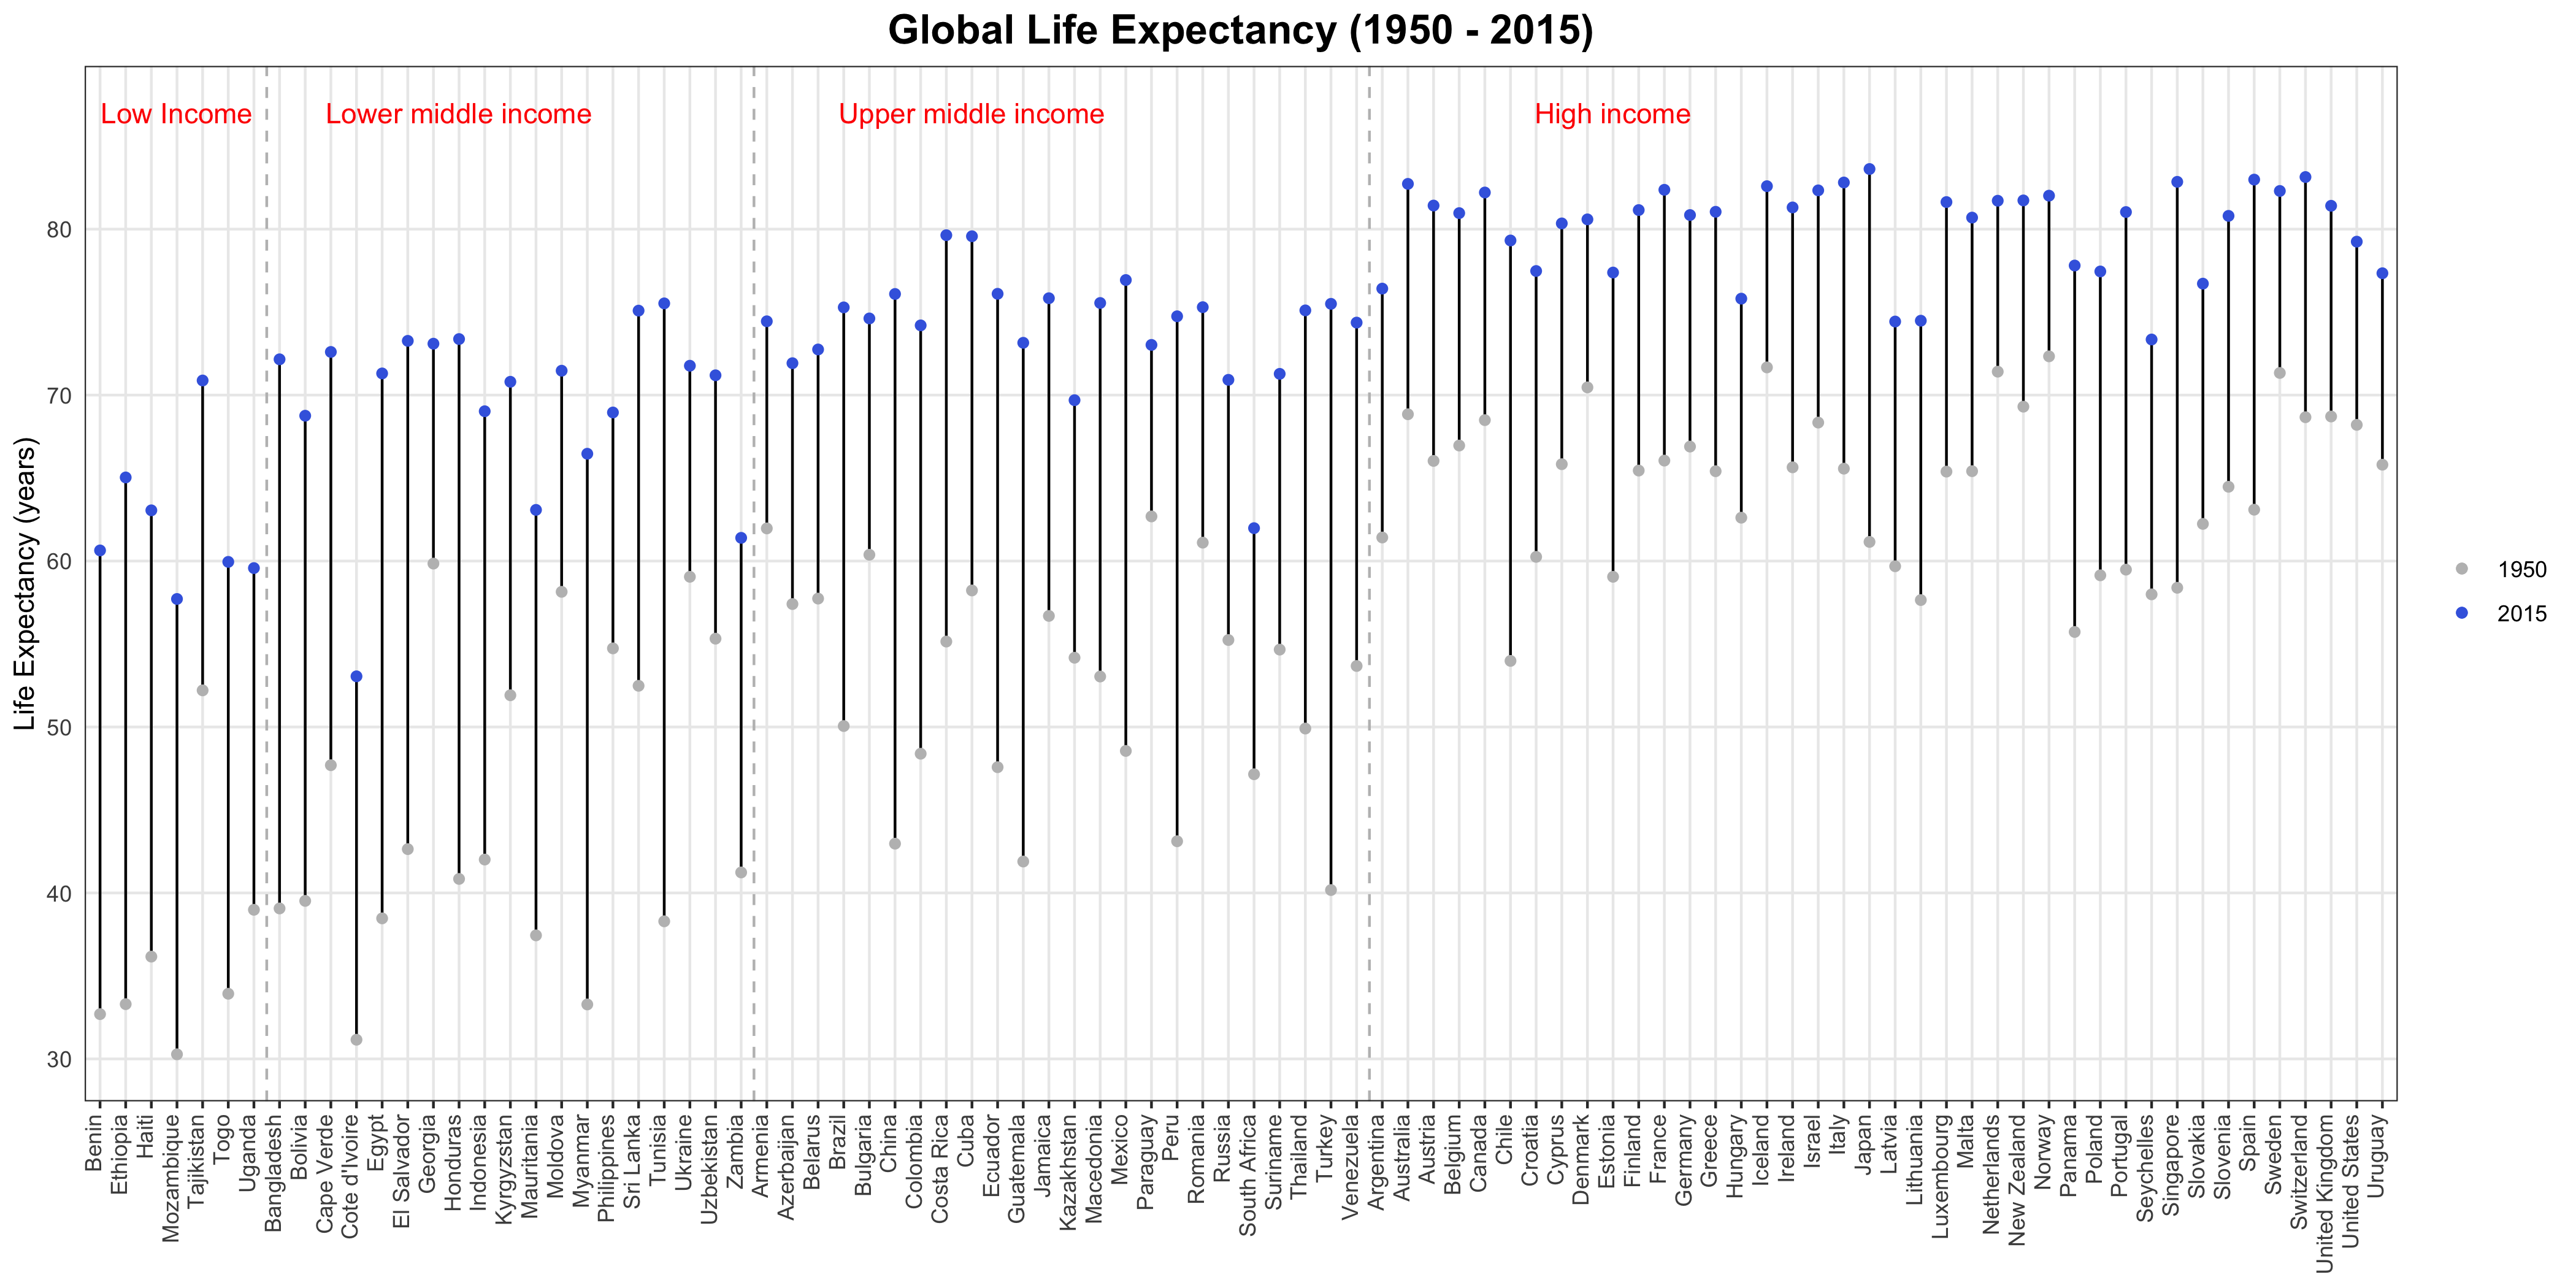 Changes in life expectancy for multiple countries